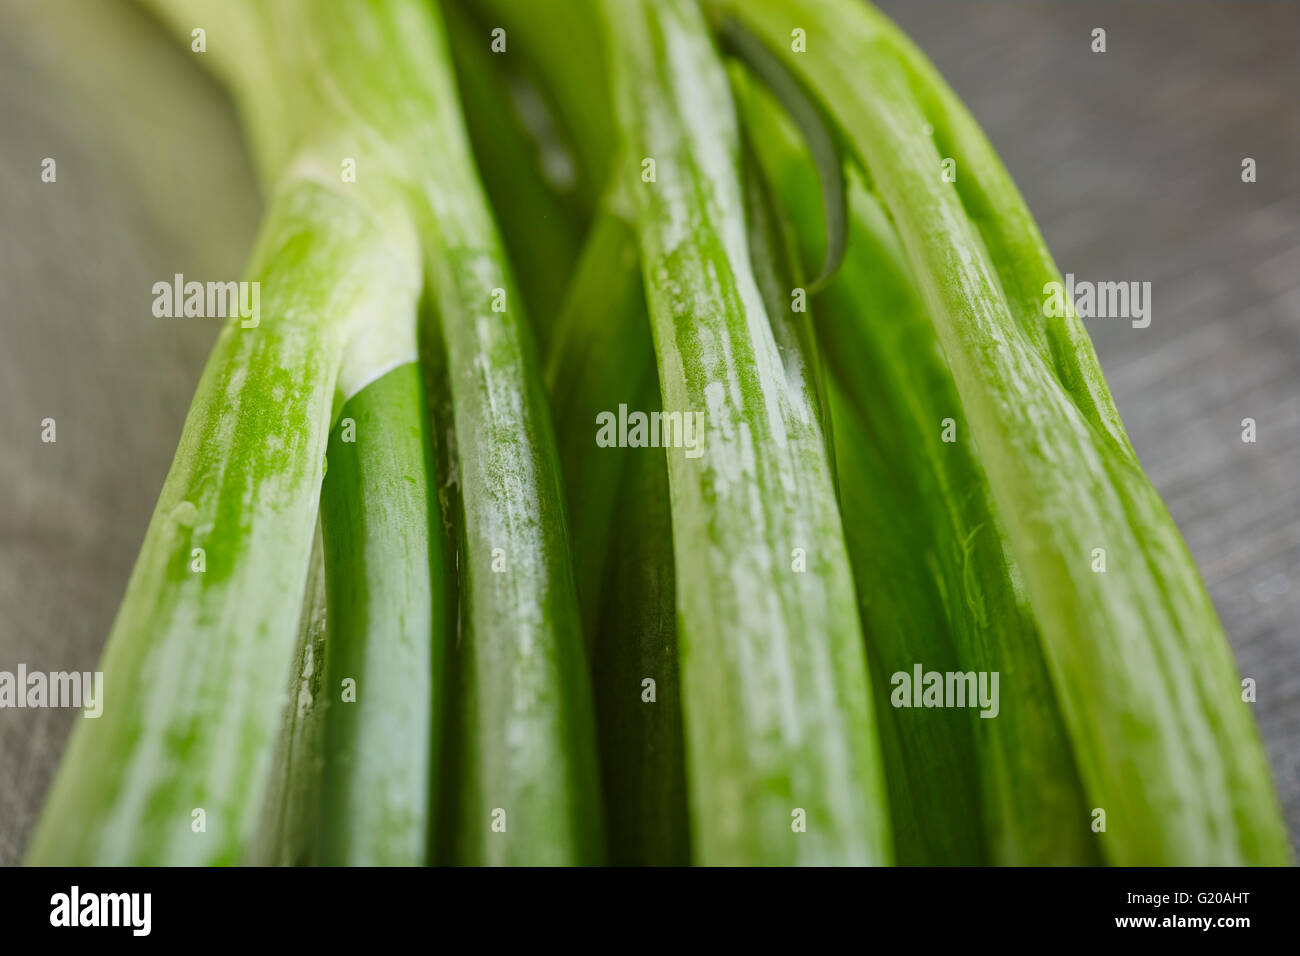 green onions, sometimes called spring onions, scallions or long onions Stock Photo